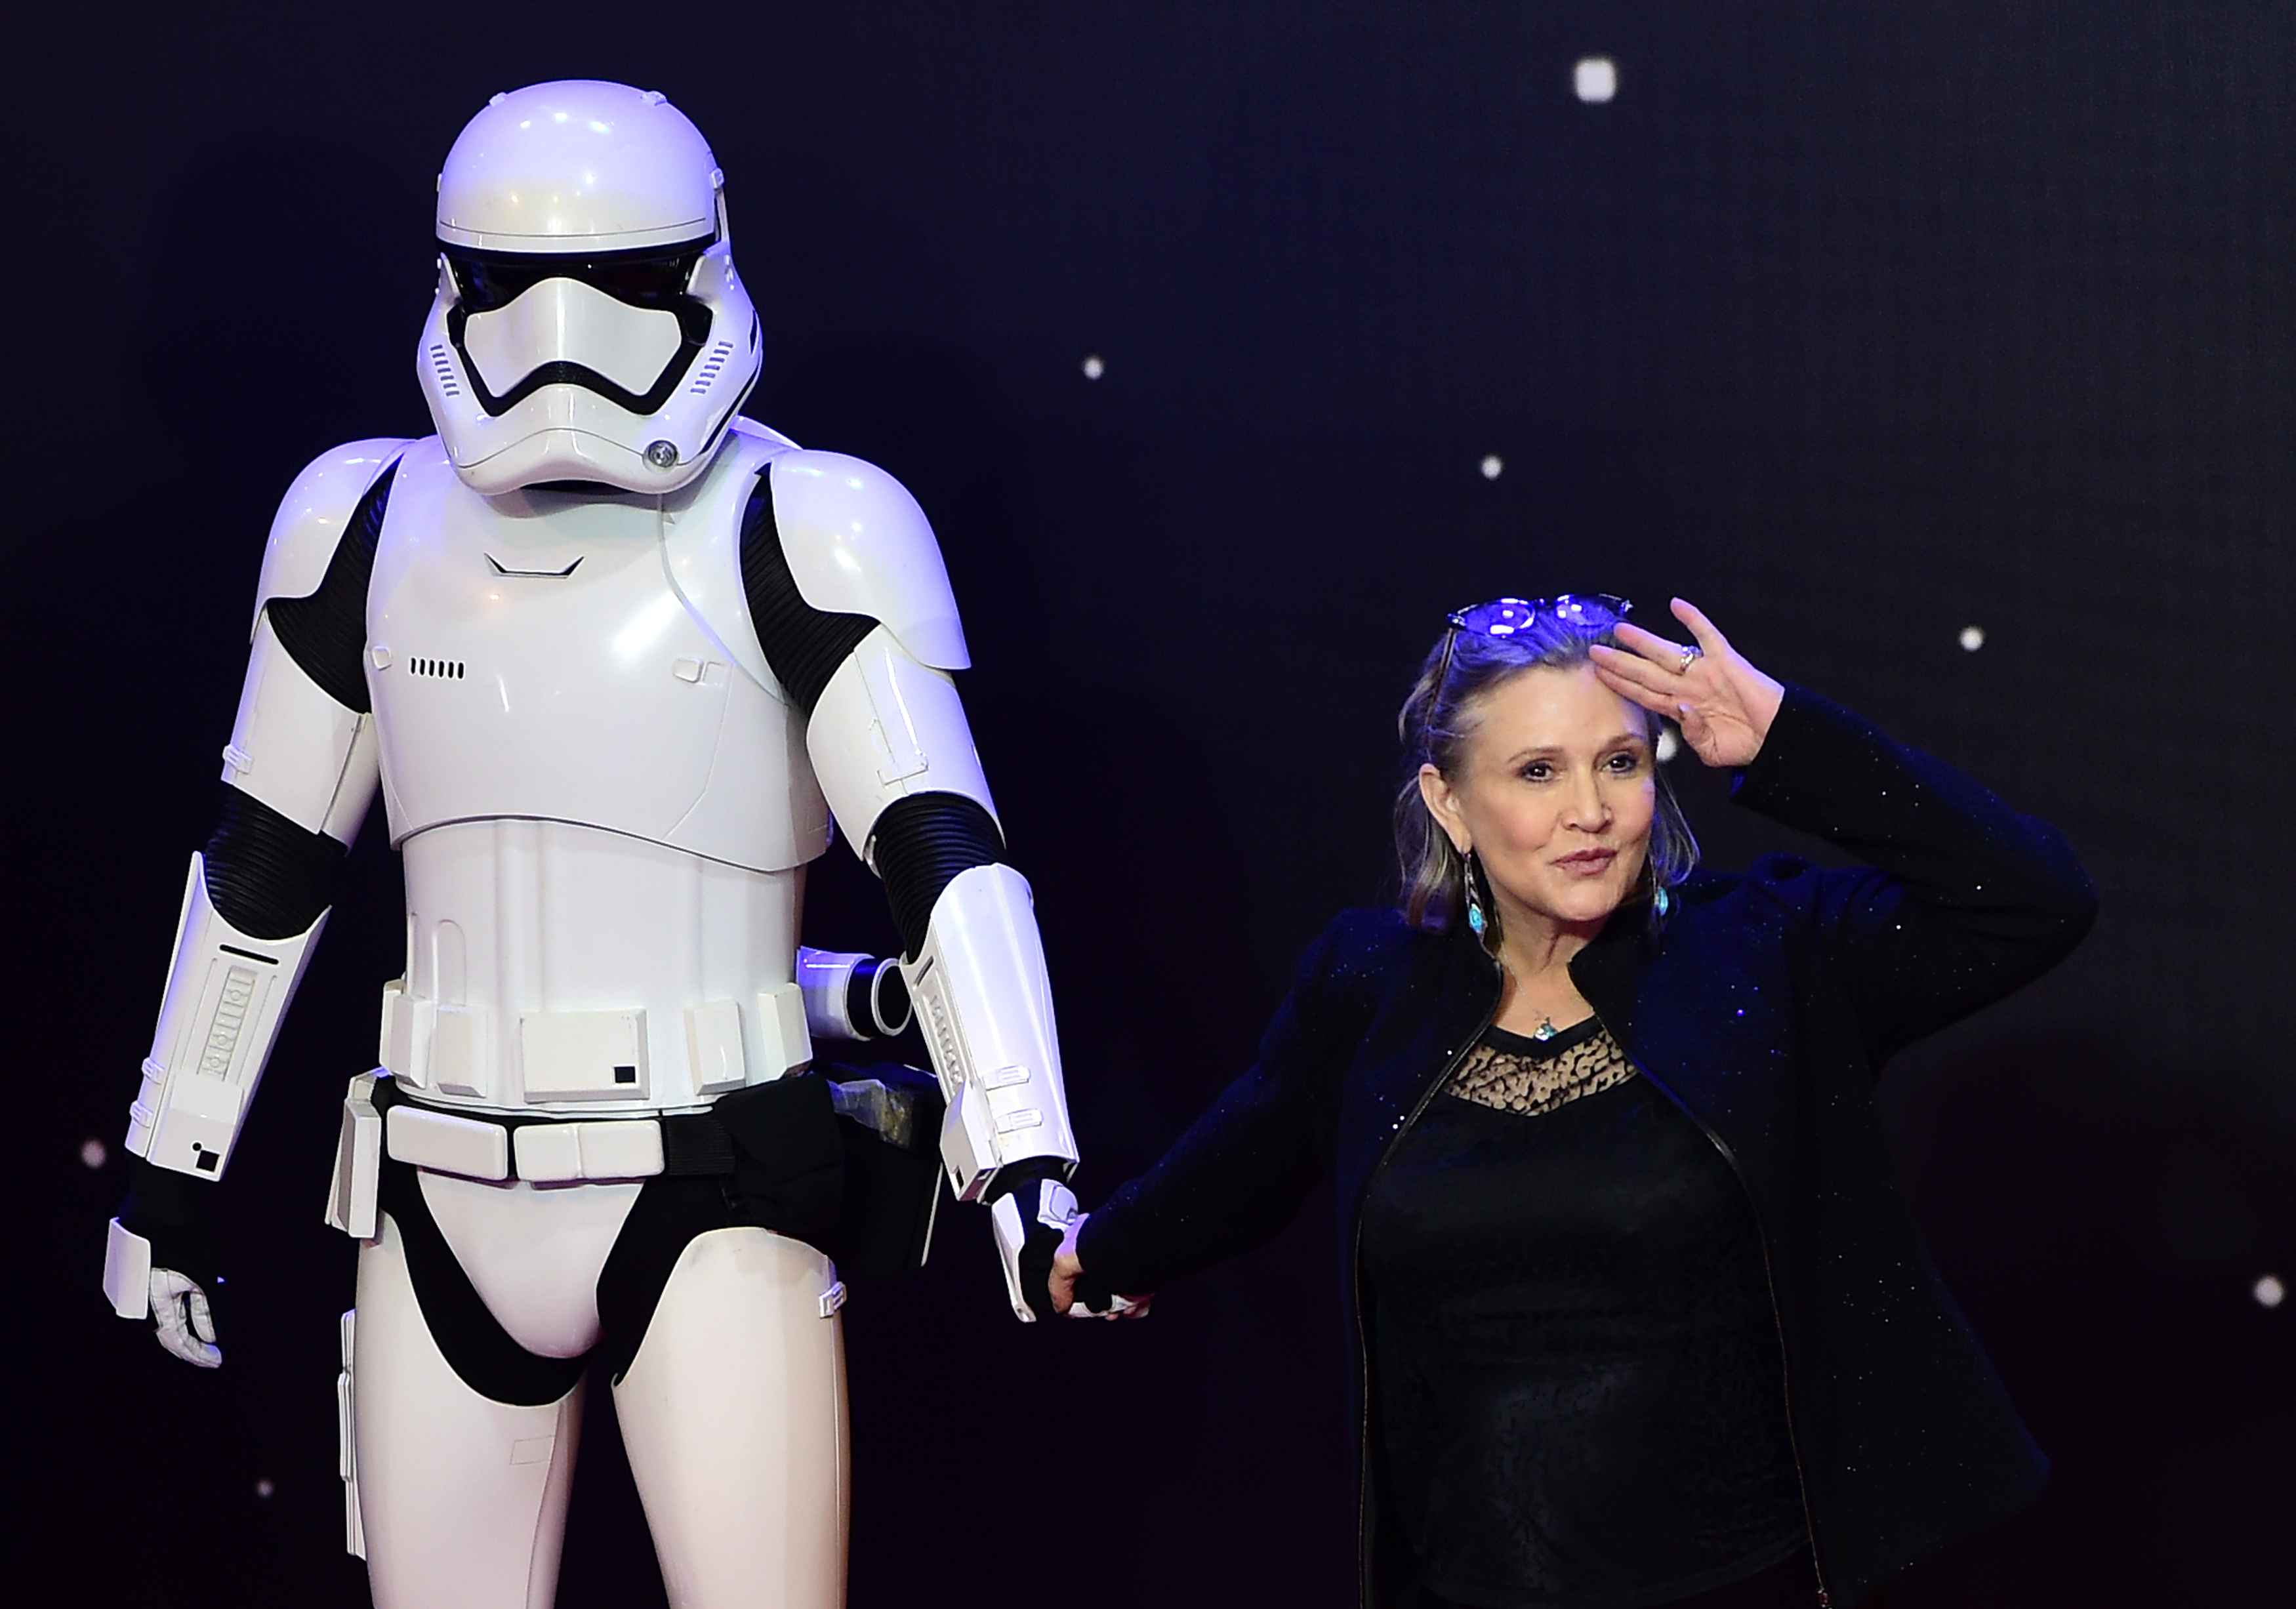 (FILES) This file photo taken on December 16, 2015 shows US actress Carrie Fisher (R) posing with a storm trooper as she attends the opening of the European Premiere of "Star Wars: The Force Awakens" in central London. Hollywood star Carrie Fisher was fighting for her life on December 23 after suffering a massive heart attack near the end of a transatlantic flight. The 60-year-old "Star Wars" actress was preparing to land in Los Angeles when she went into cardiac arrest, and was given cardiopulmonary resuscitation by an emergency responder on board.  / AFP PHOTO / LEON NEAL